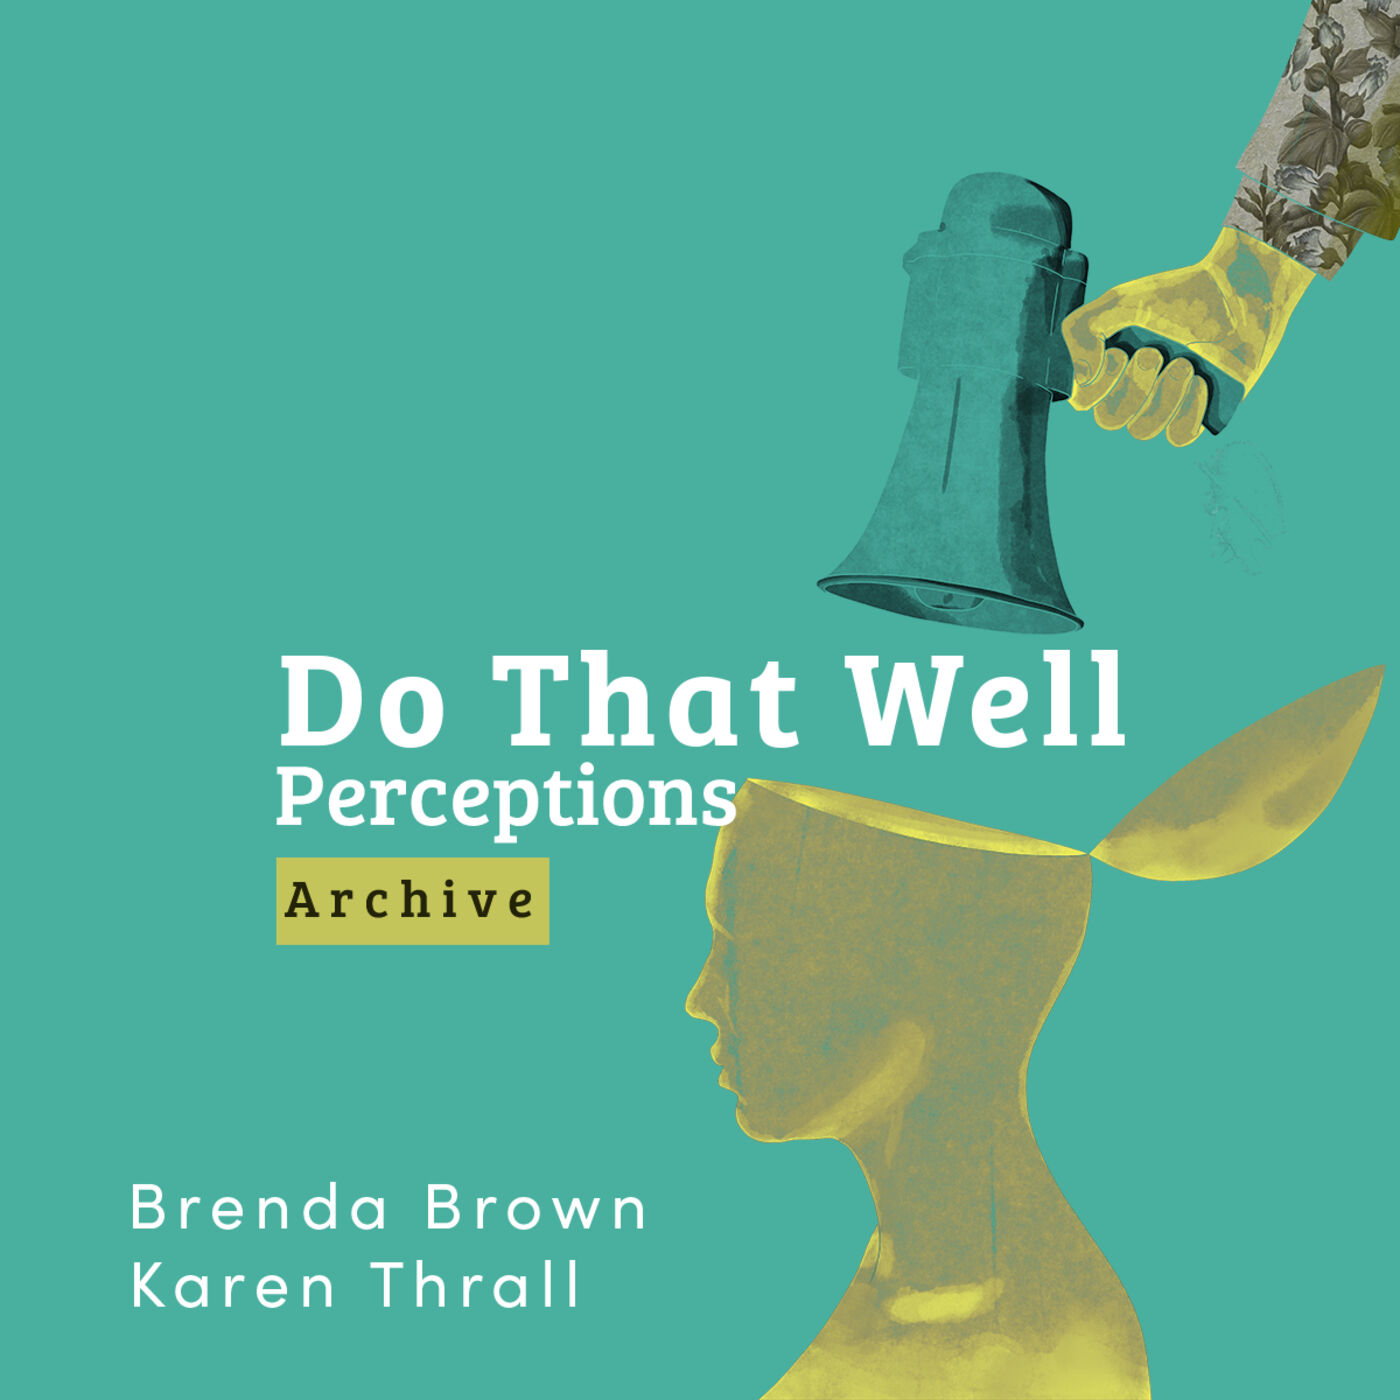 [archive] Do That Well:  Perceptions